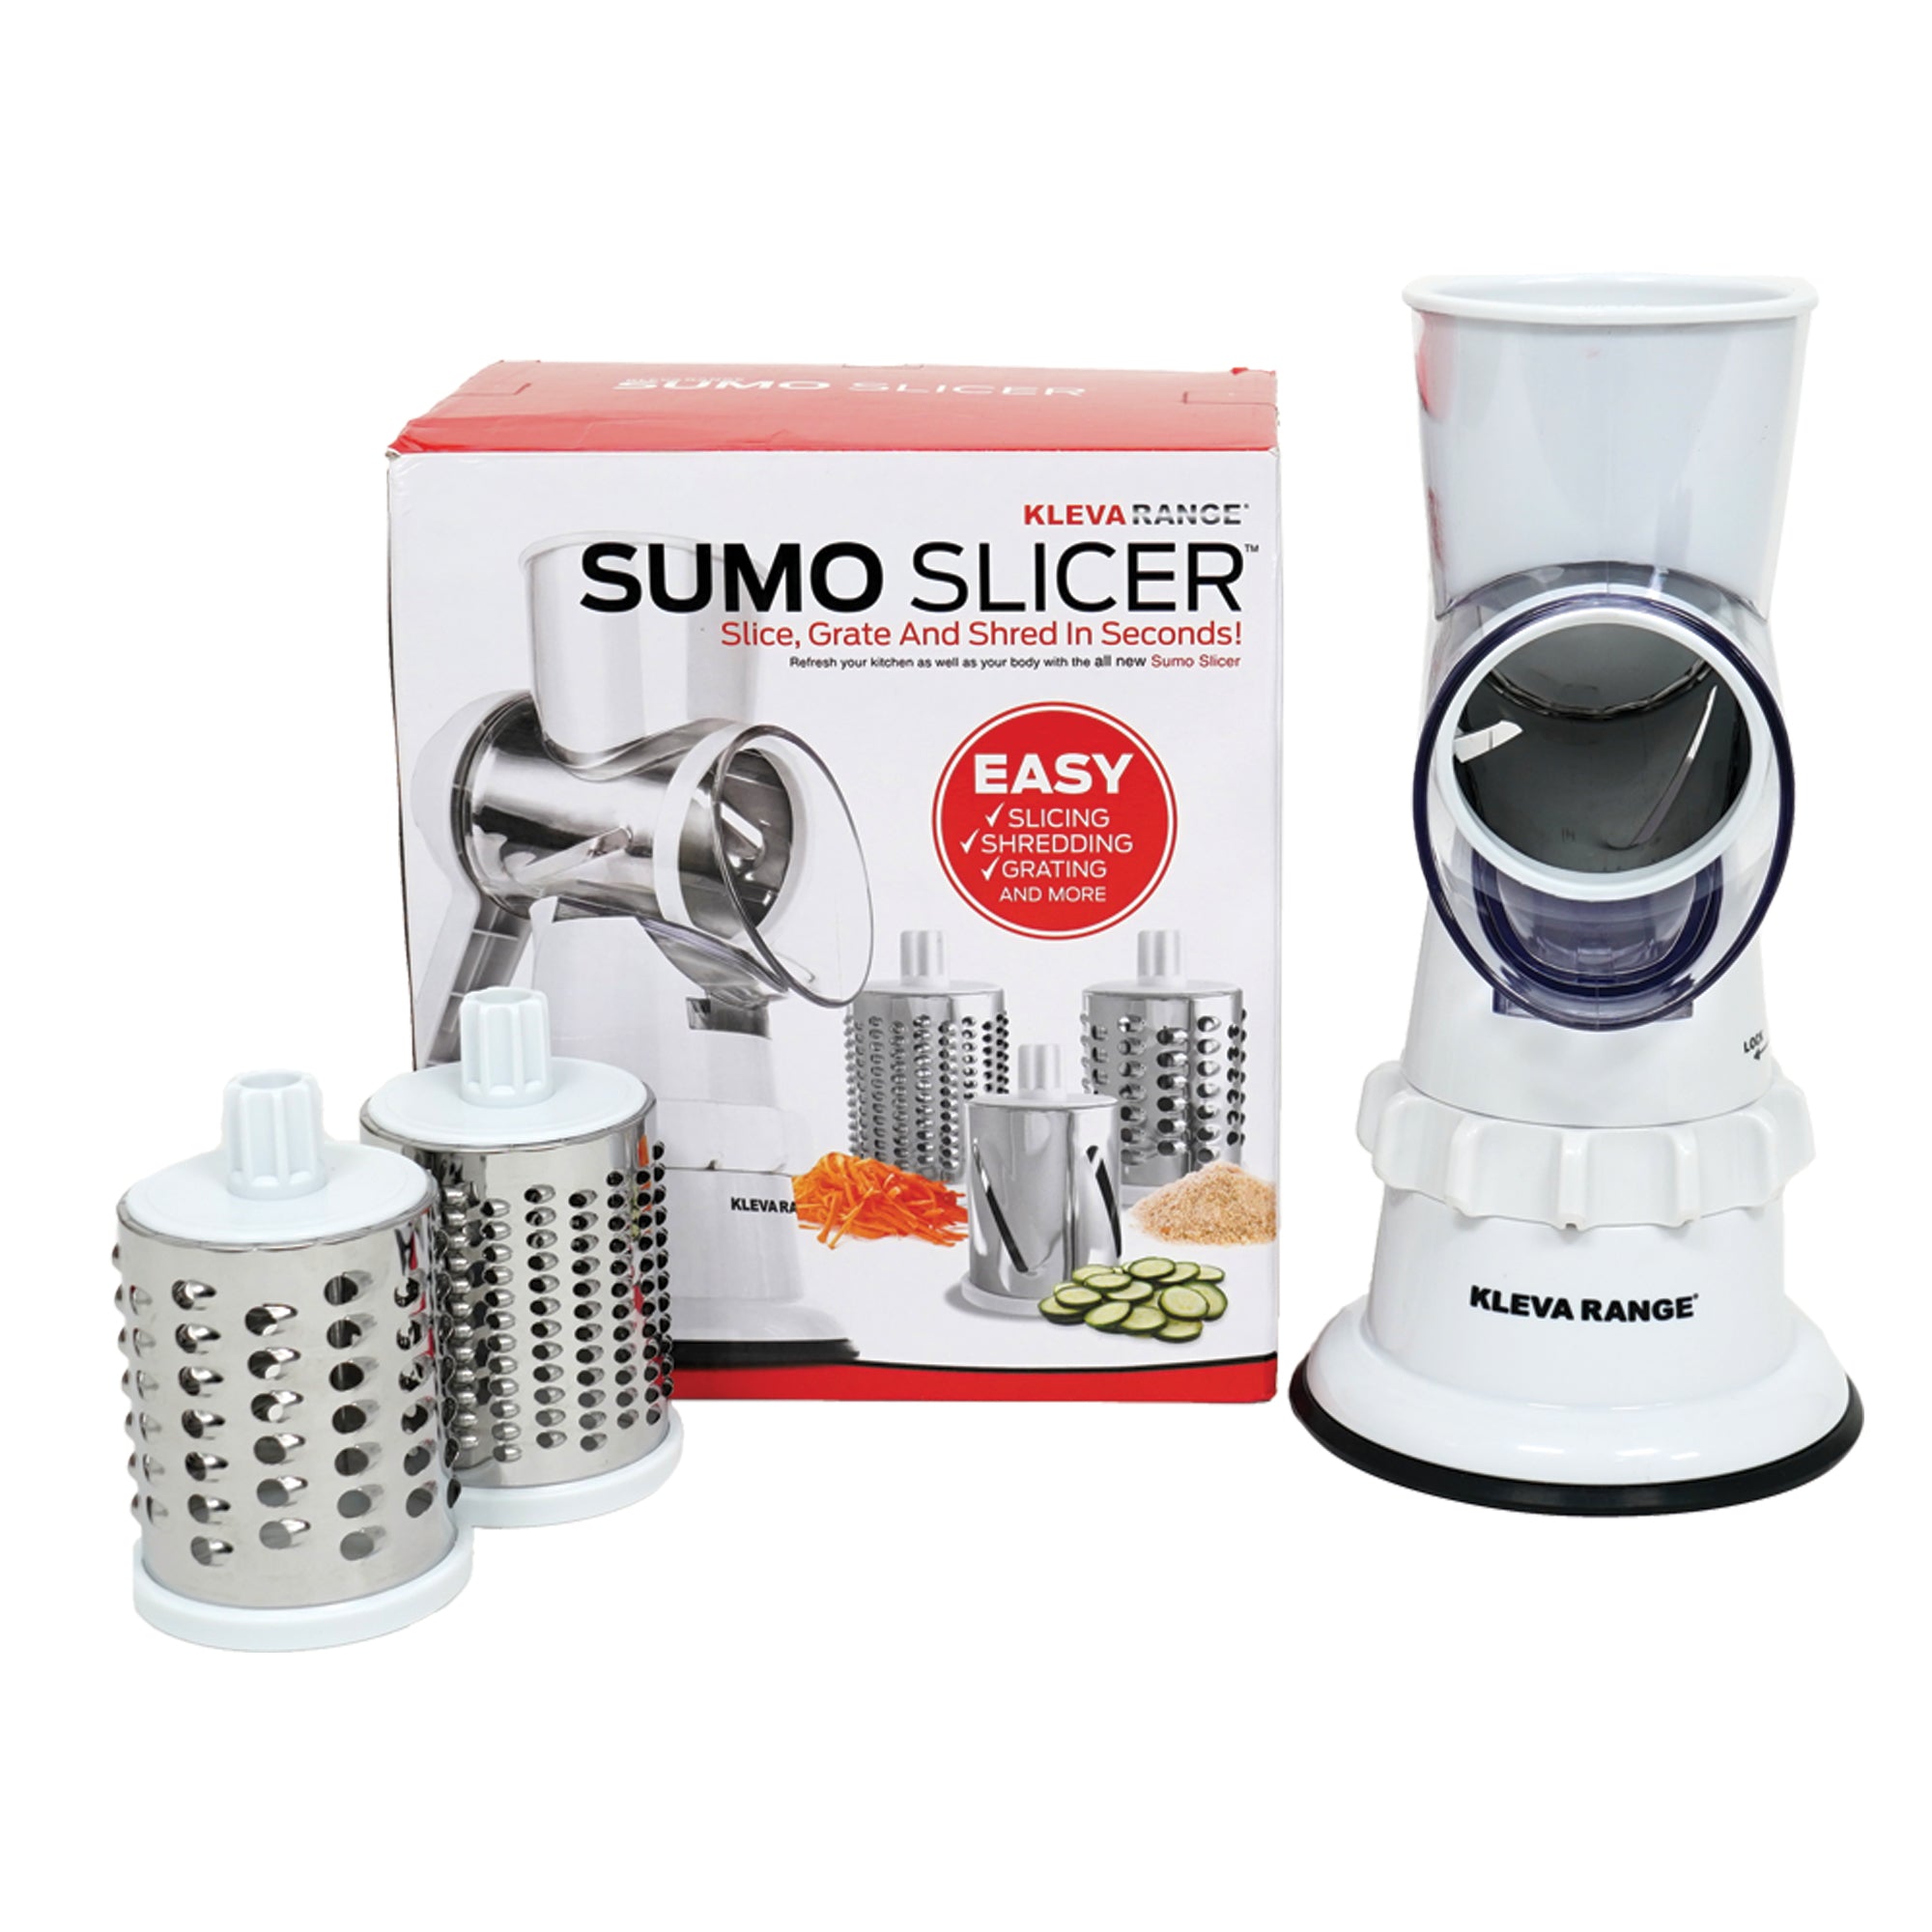 Sold at Auction: A Kleva Sumo Slicer in sealed box